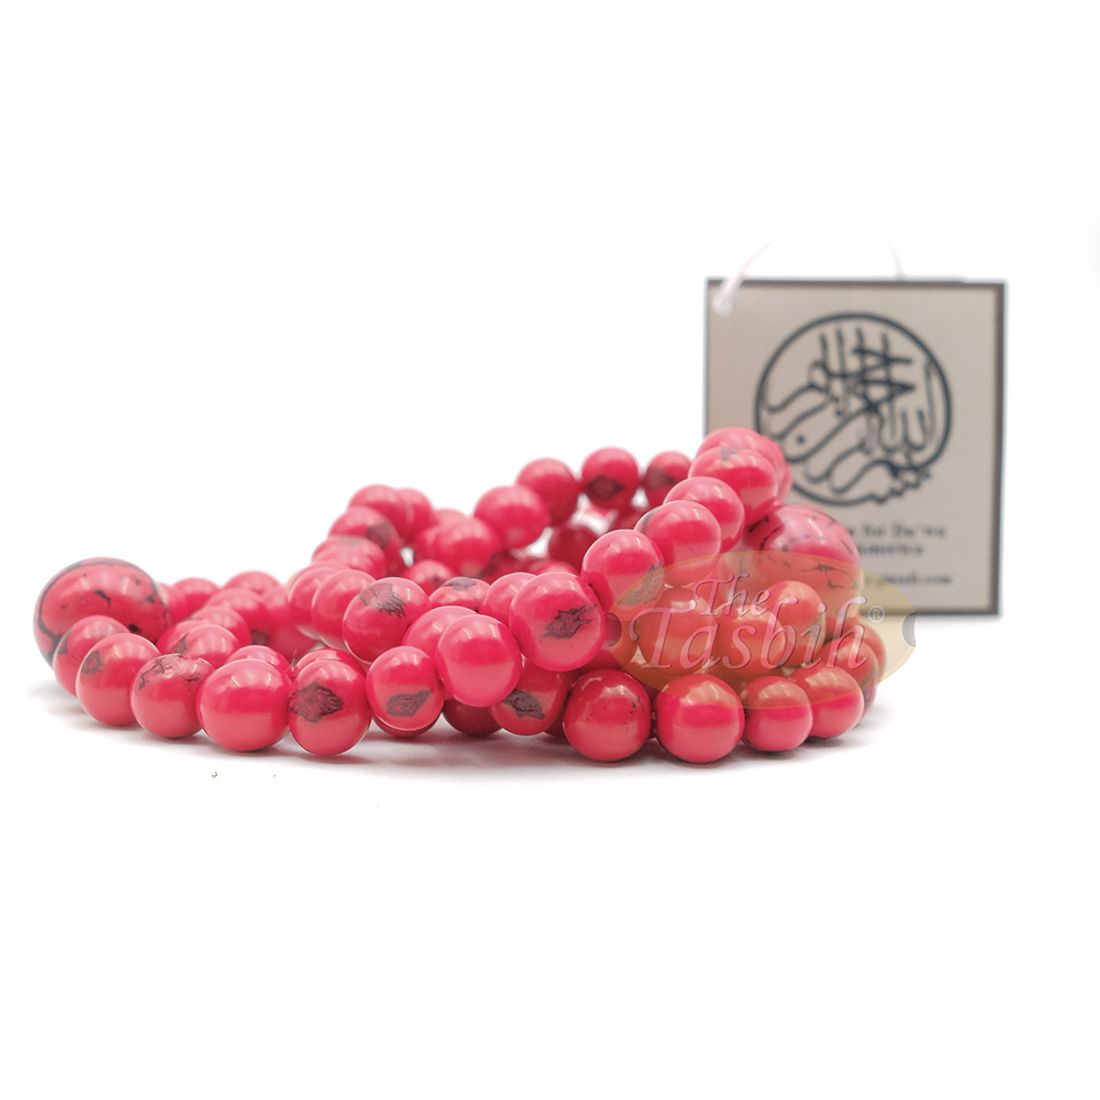 Red Colored Natural Dye Eco-friendly Sustainable Original Açai Seed 9mm Beads Traditional Tasbih